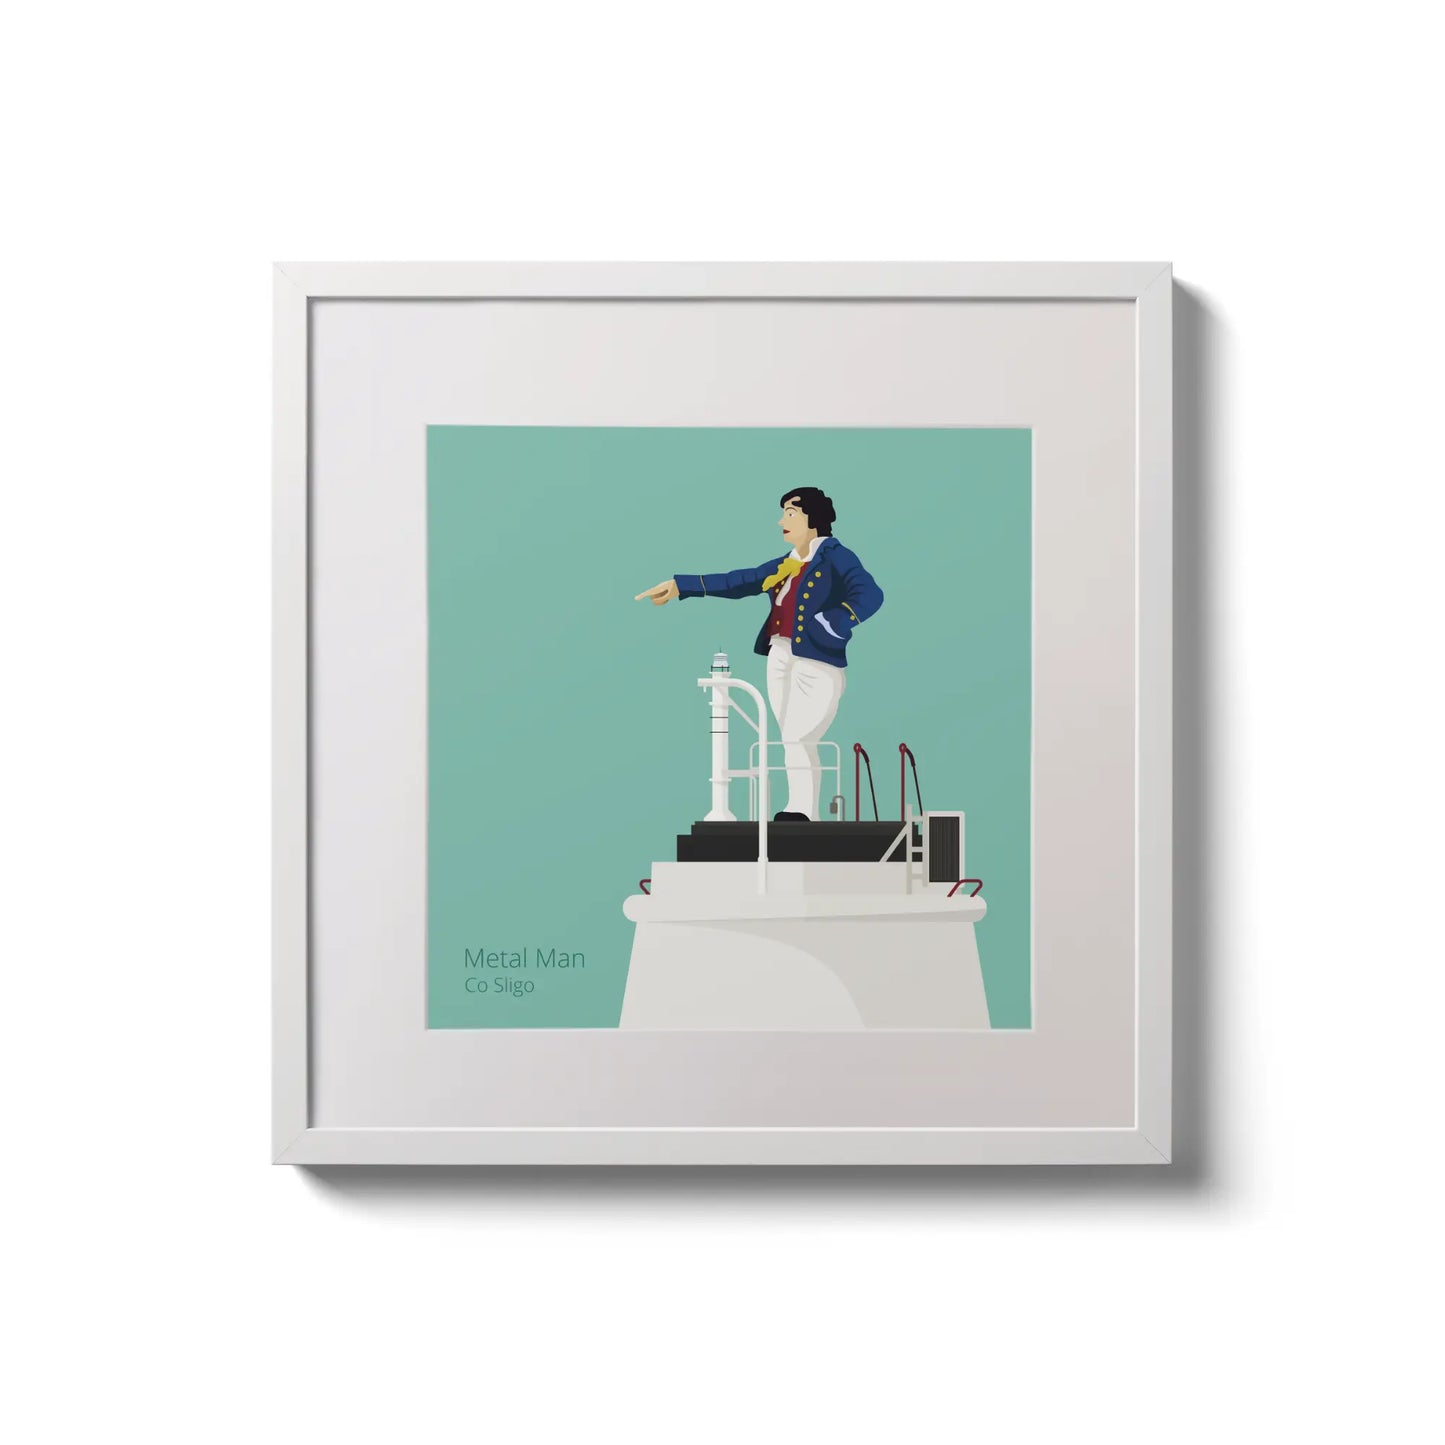 Illustration of Metal Man lighthouse on an ocean green background,  in a white square frame measuring 20x20cm.